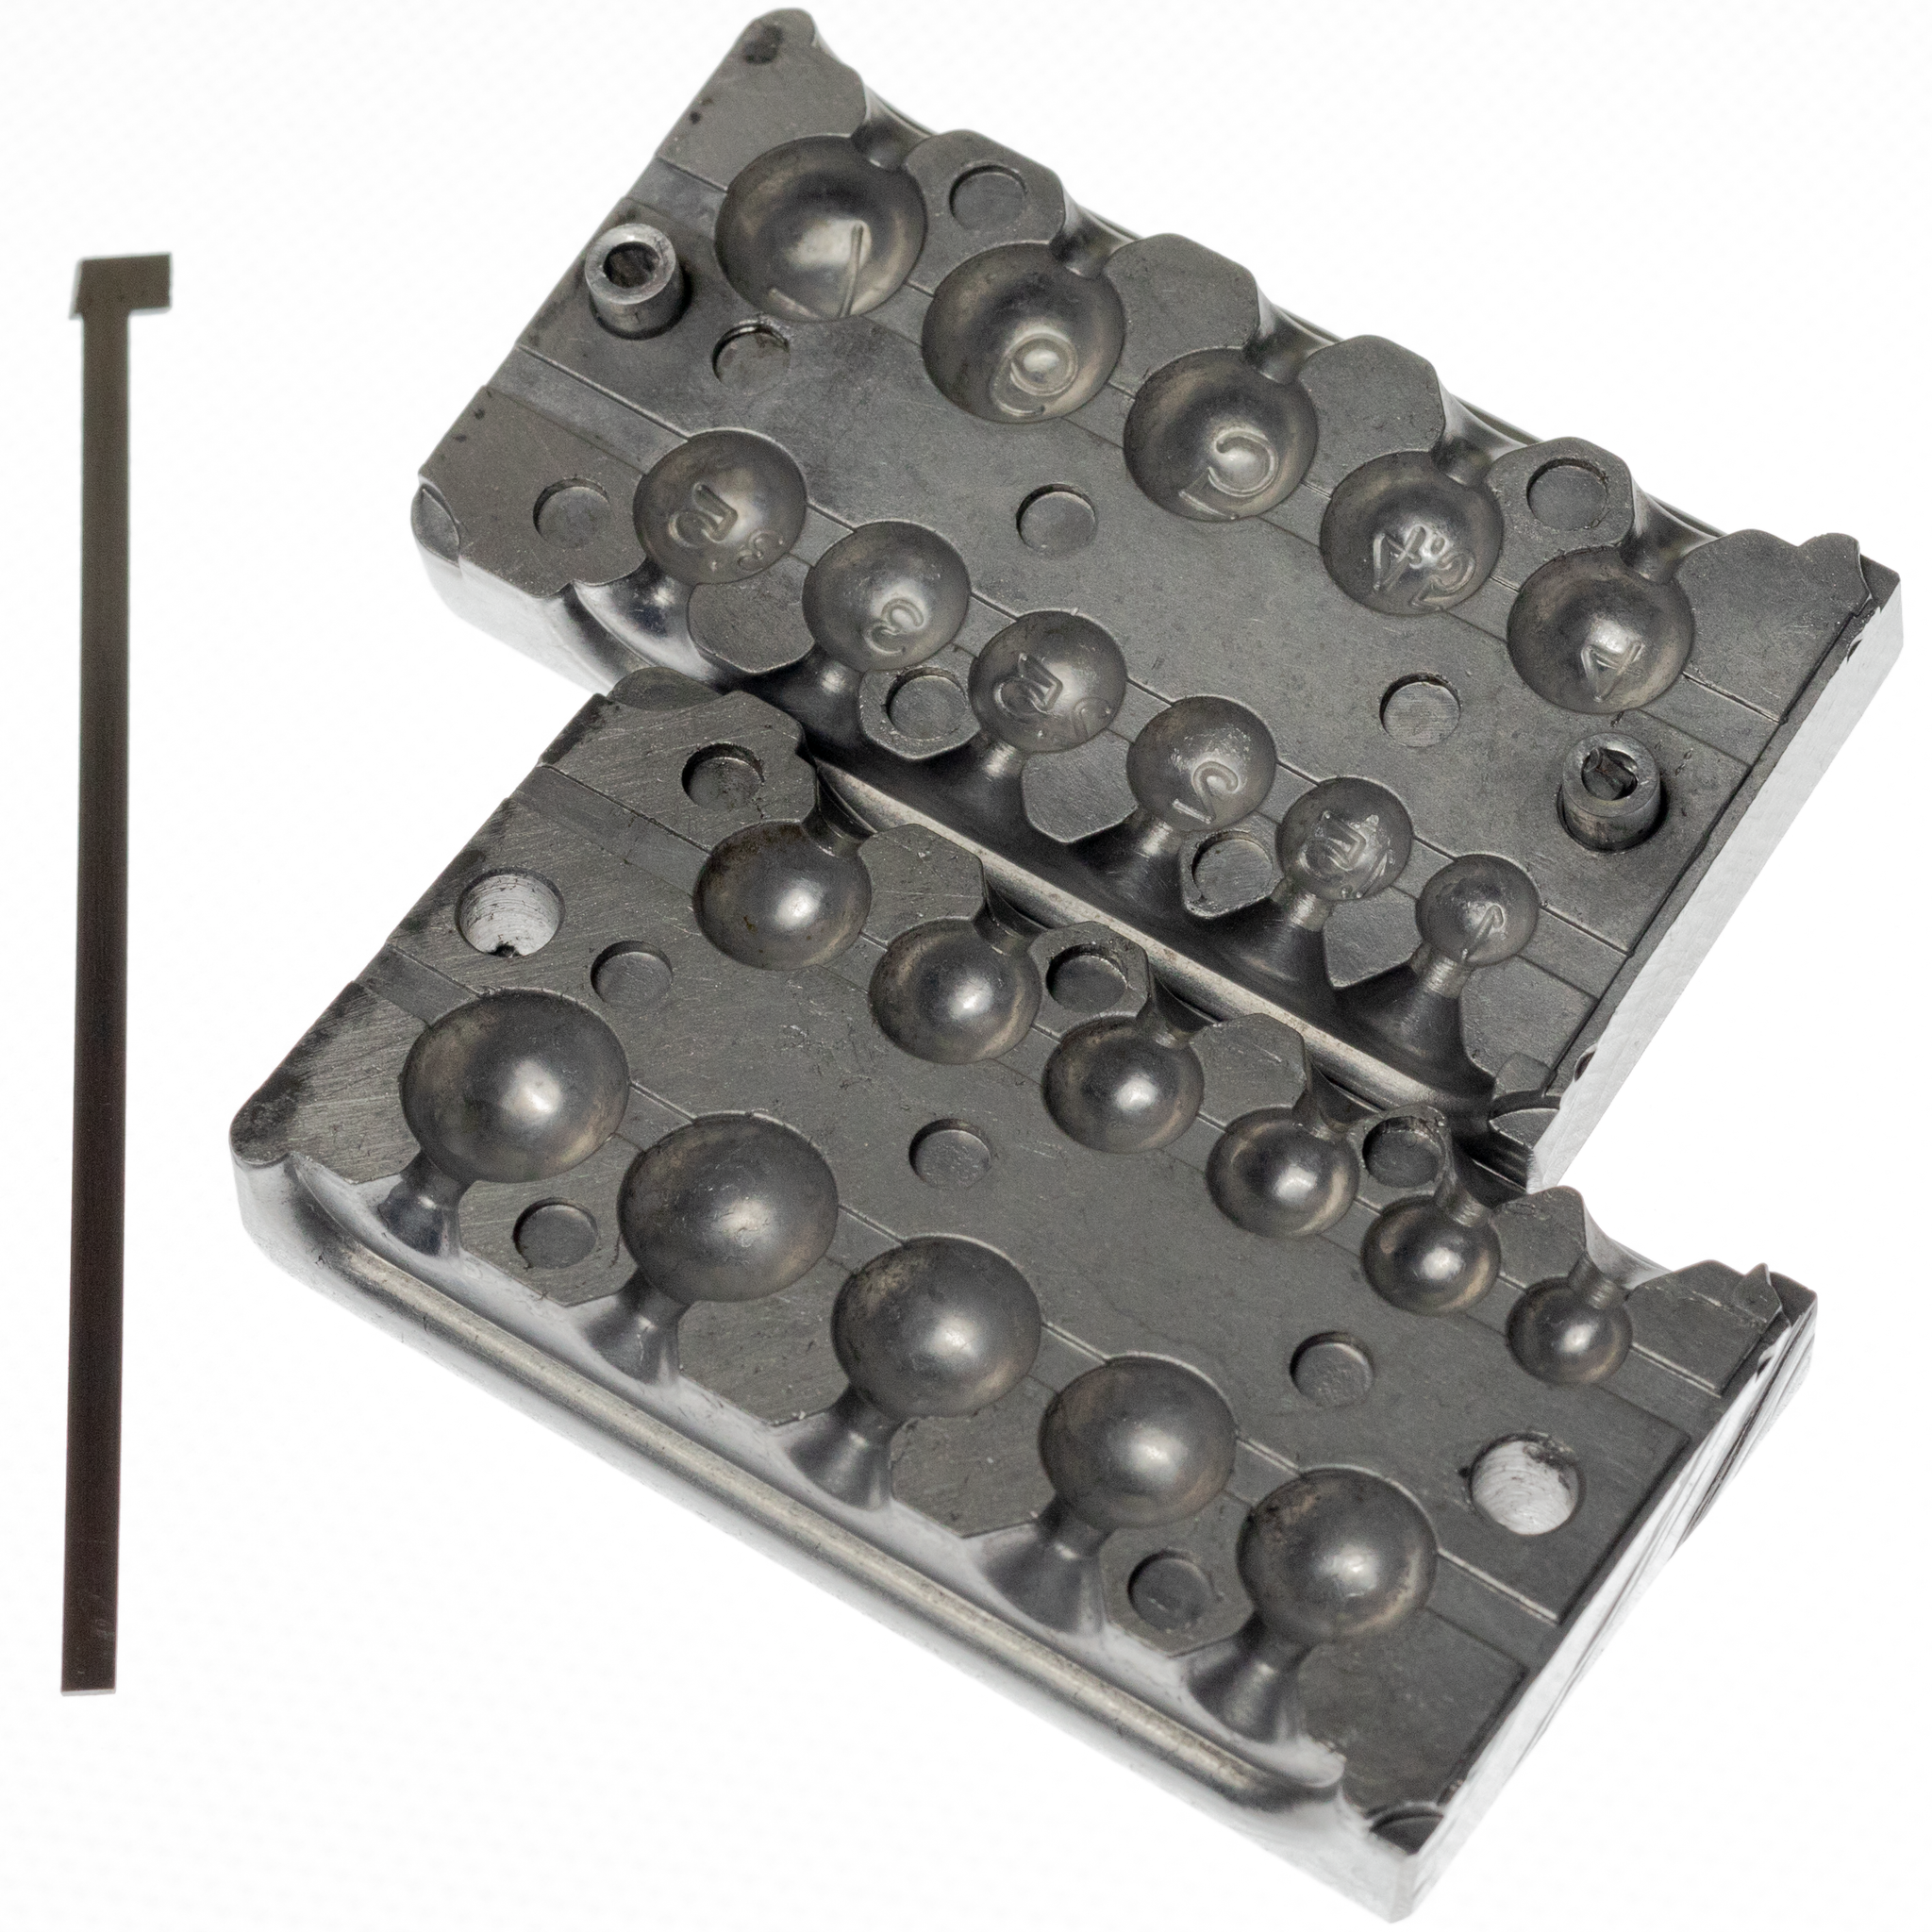 FRESHWATER WORM WEIGHT Concave sinker mold 1/4,3/8,1/2,3/4oz CNC Aluminum  $165.00 - PicClick